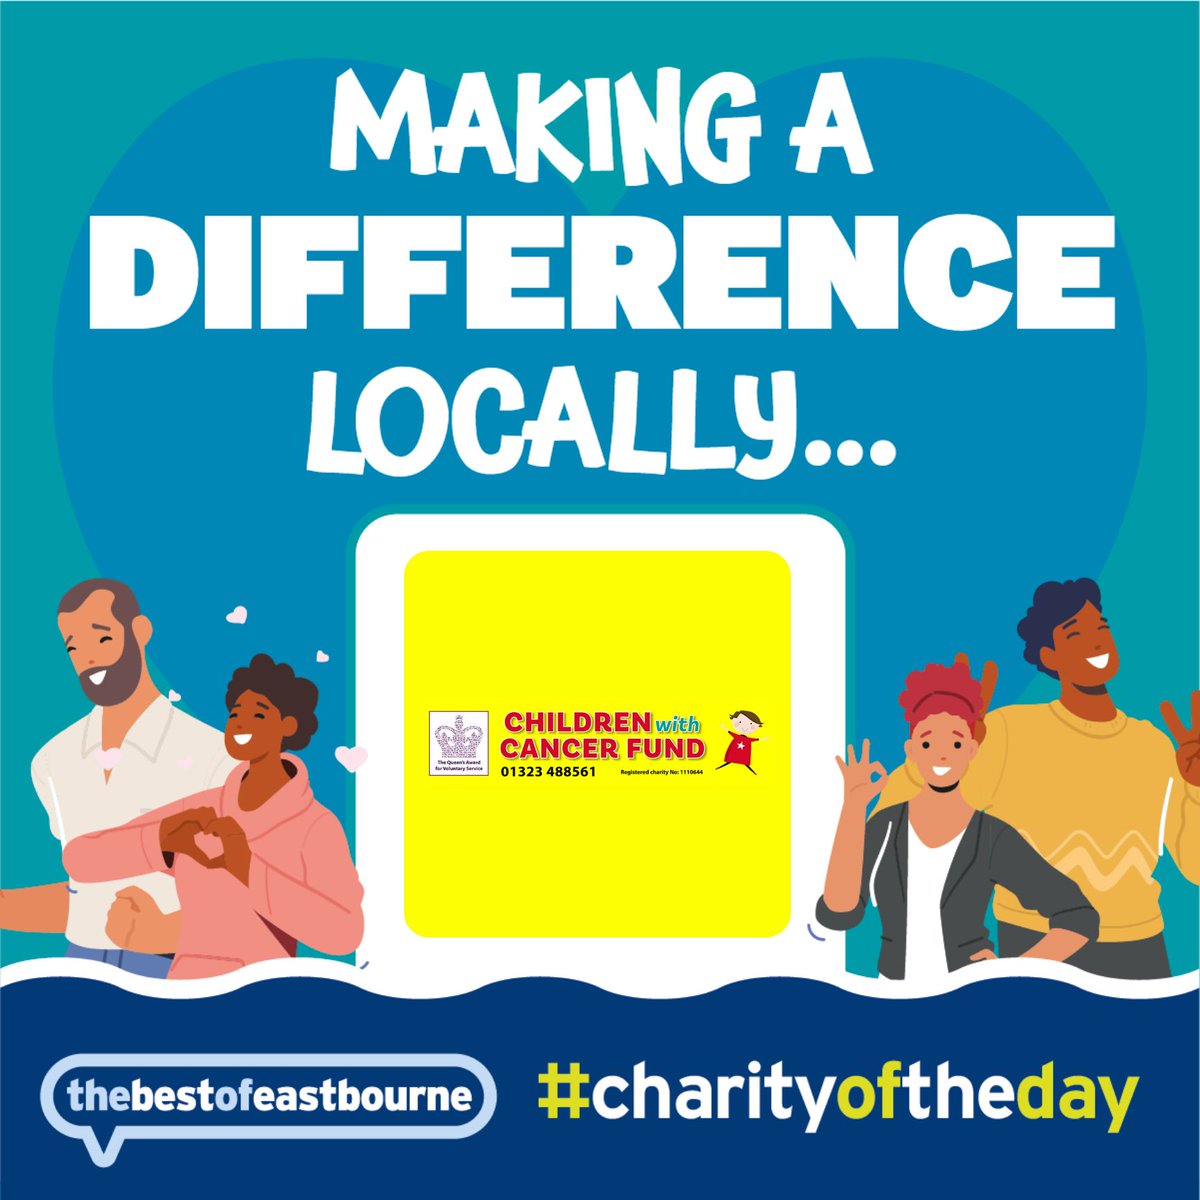 🤝 Making a difference locally 💙 Please show your support for Children with Cancer Fund, you can find out more about this local charity in our Community Guide bit.ly/2GoD4rh #BestOfEastbourne #CharityOfTheDay #EastbourneCharity #EBcharity #EastbourneVolunteer